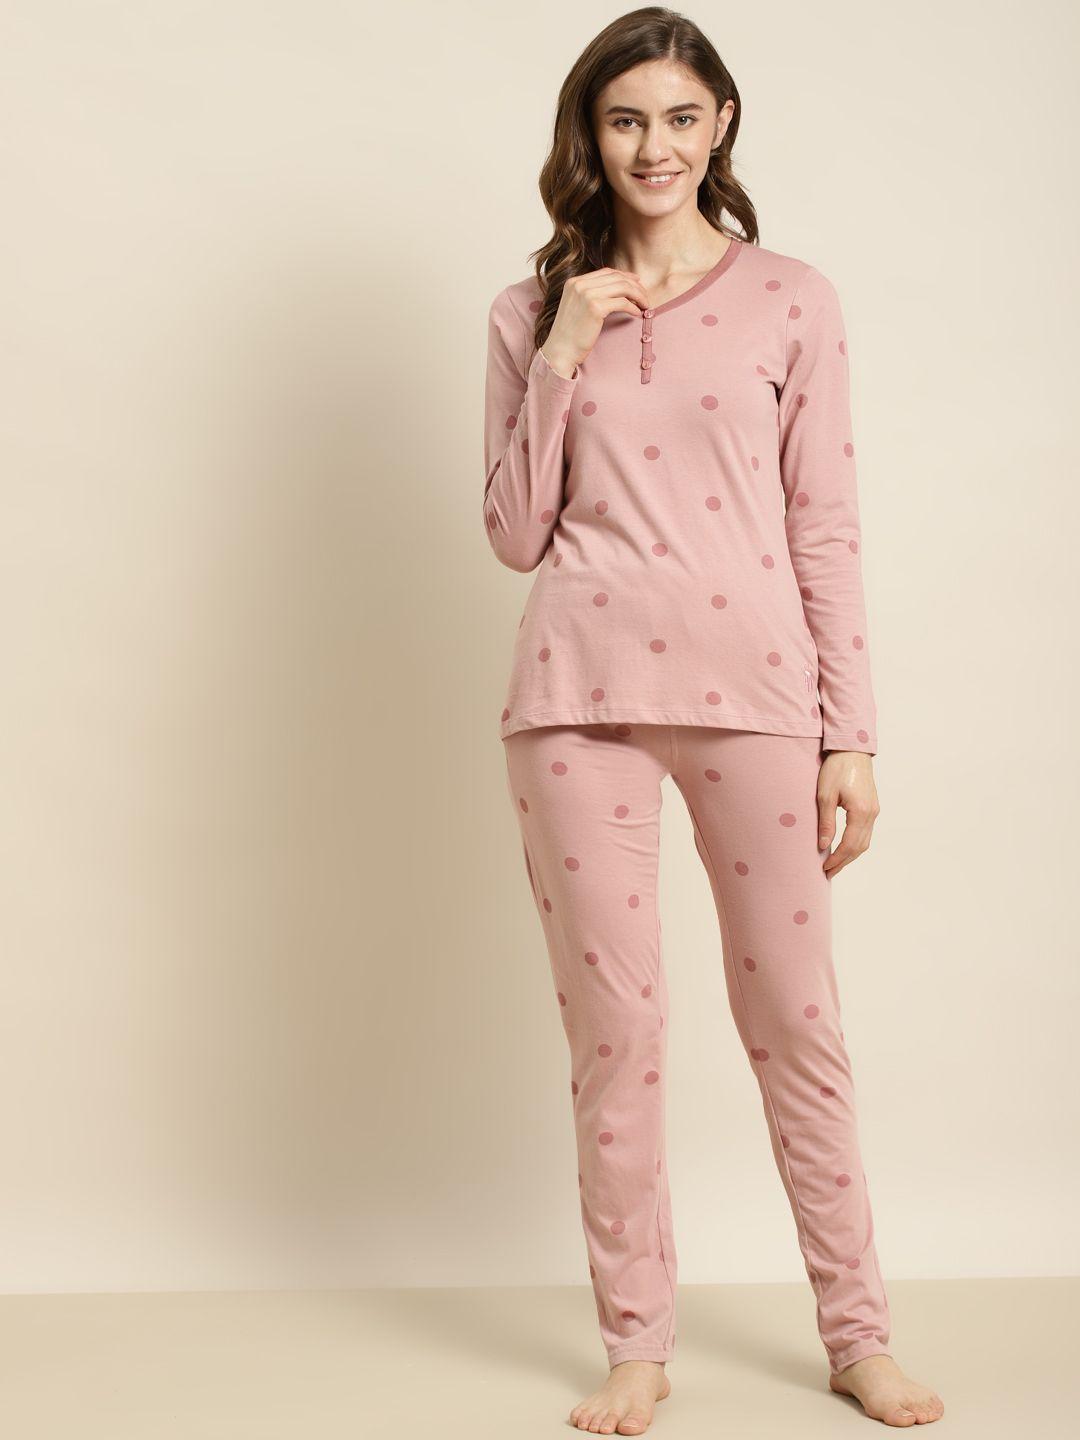 sweet-dreams-women-dusty-pink-pure-cotton-polka-dots-printed-night-suit